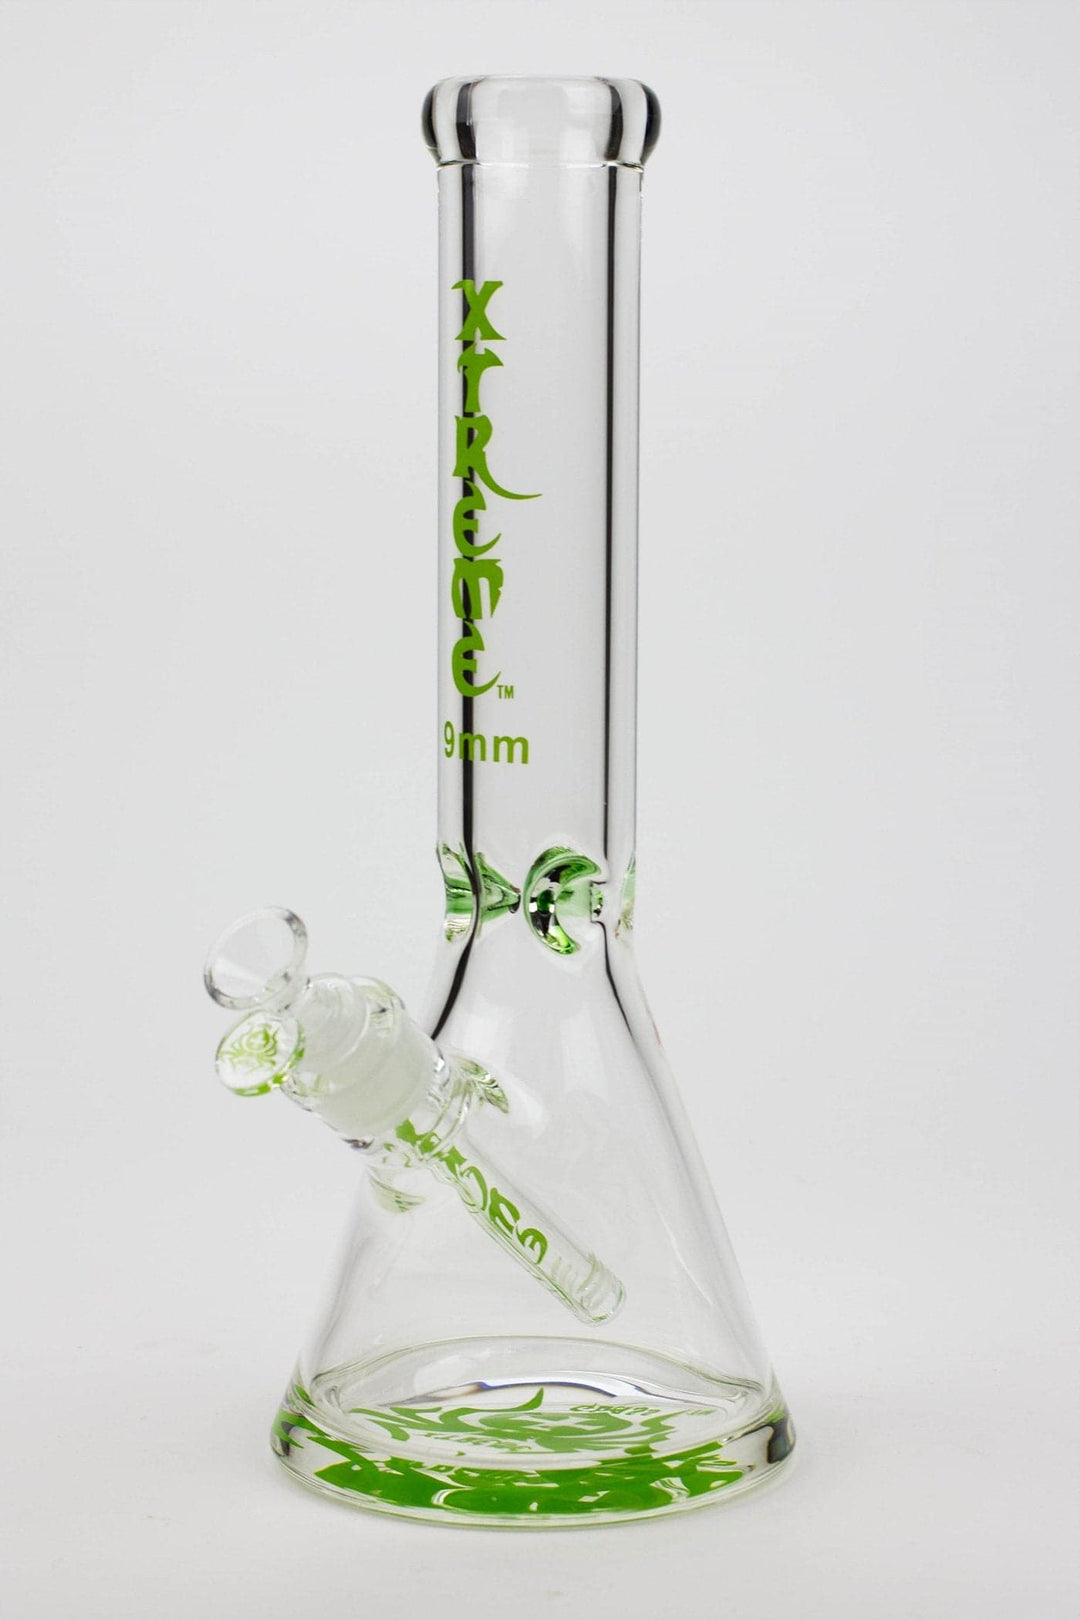 Xtreme glass classic glass beaker water pipes_8